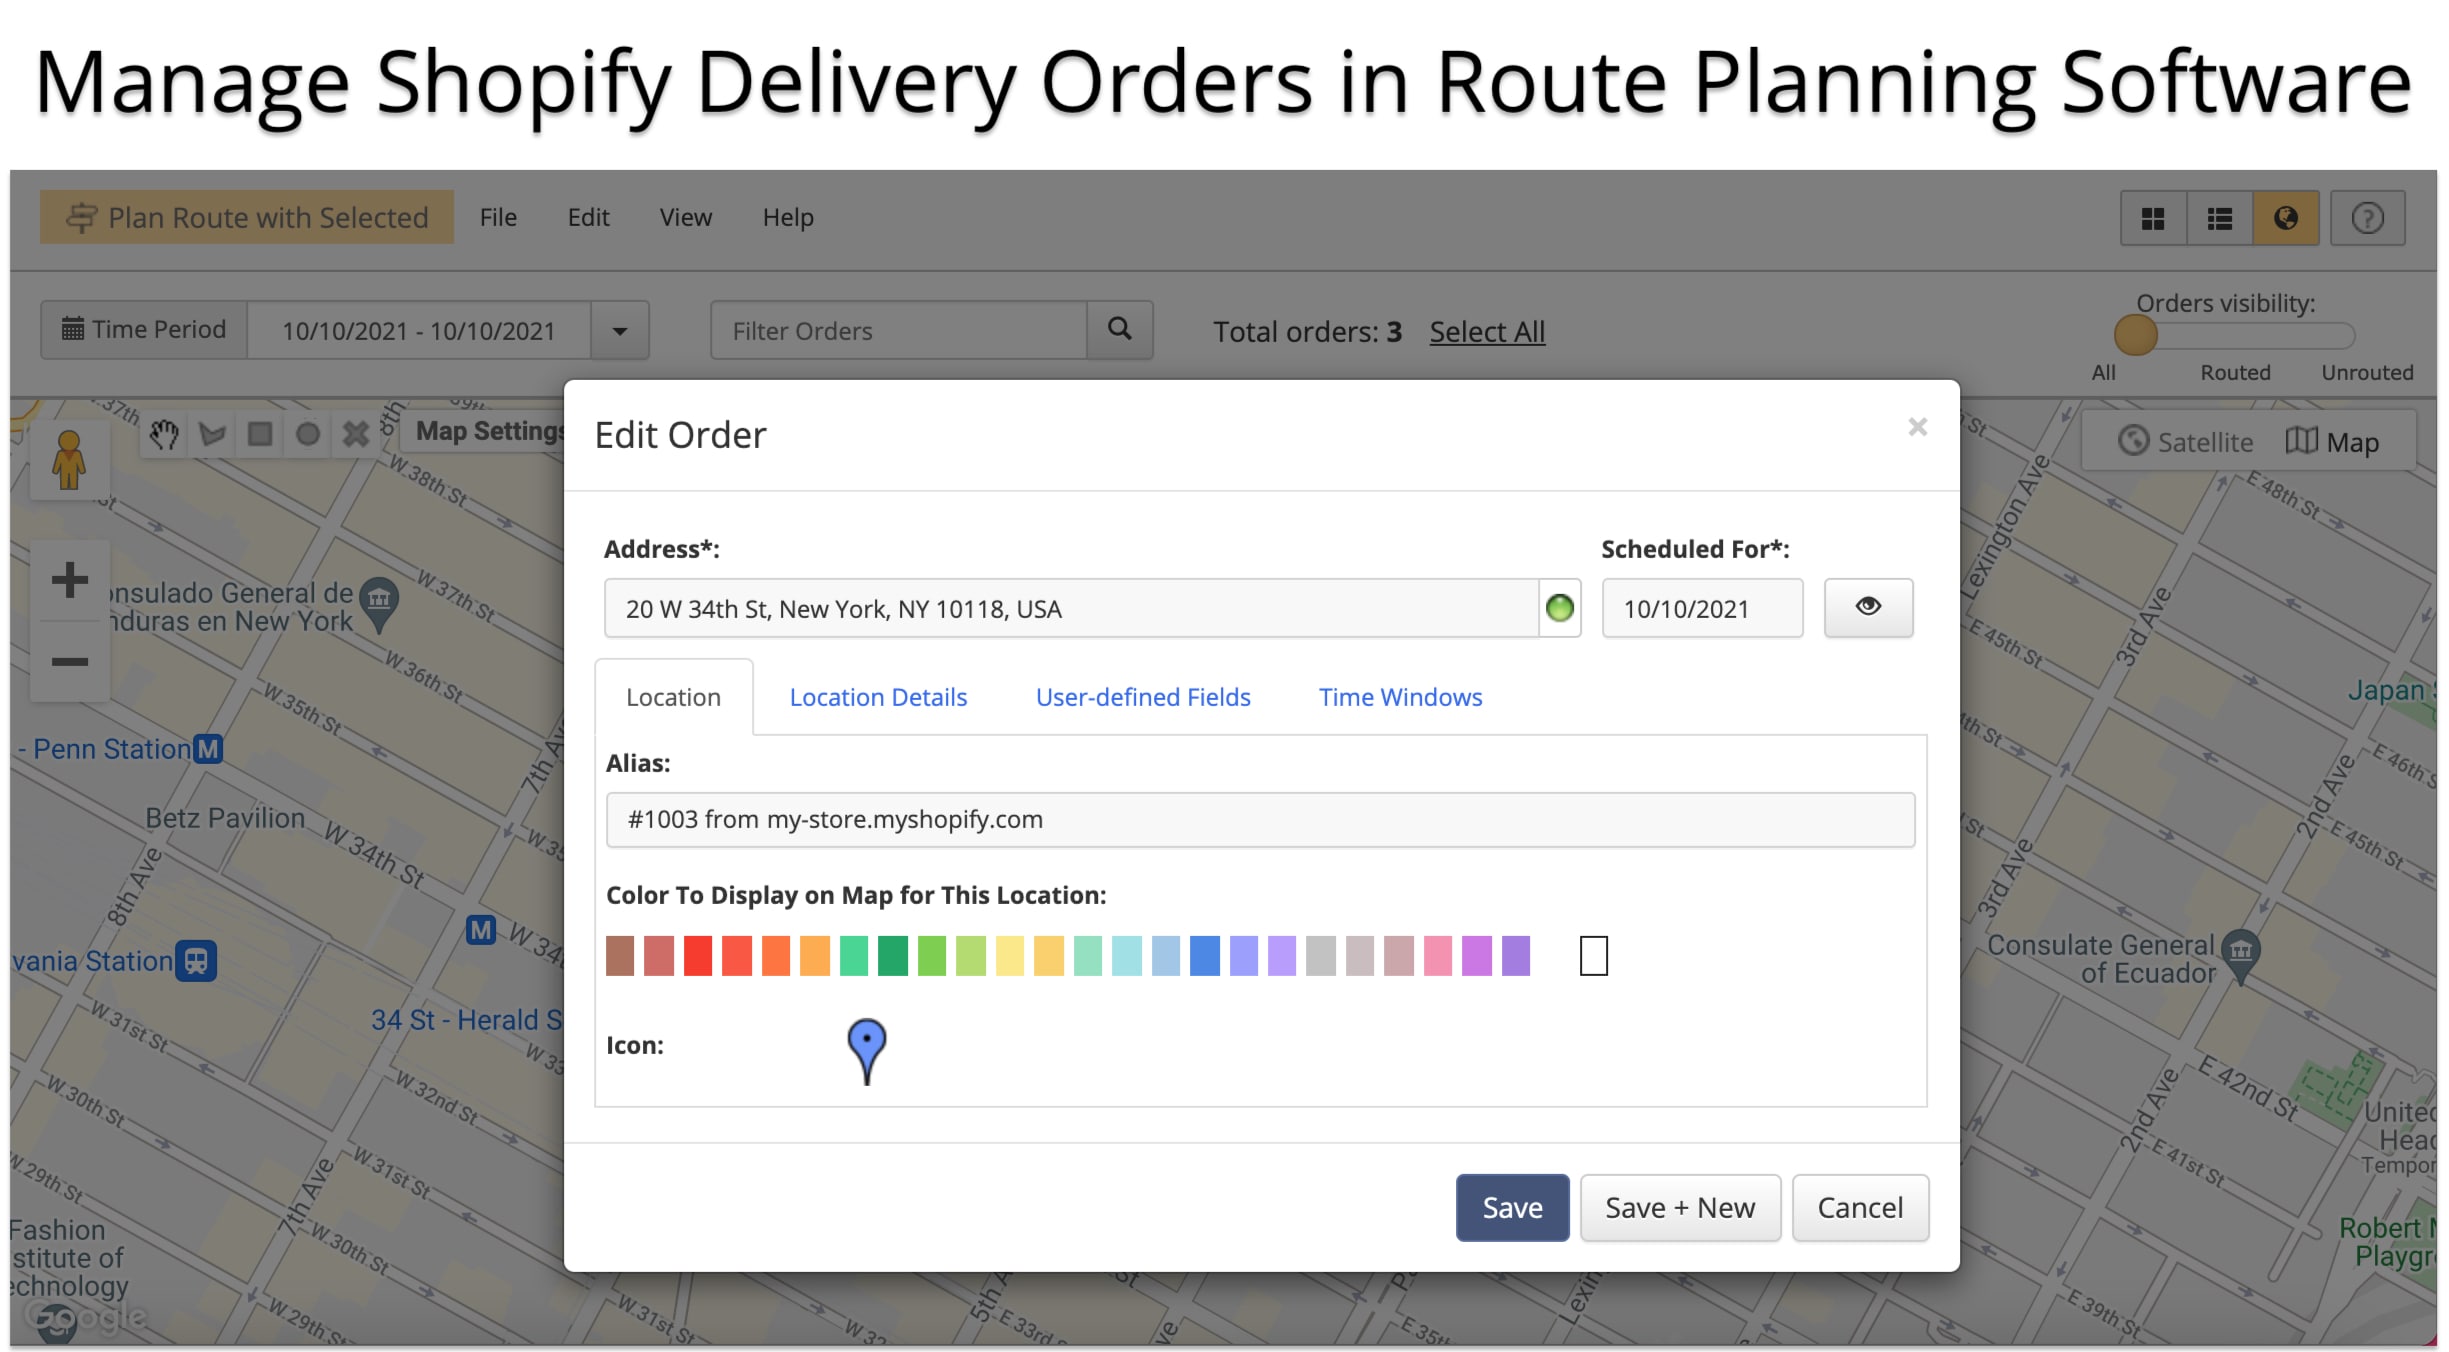 Manage synced Shopify deliveries and order shippings in the Route4Me route planning software.